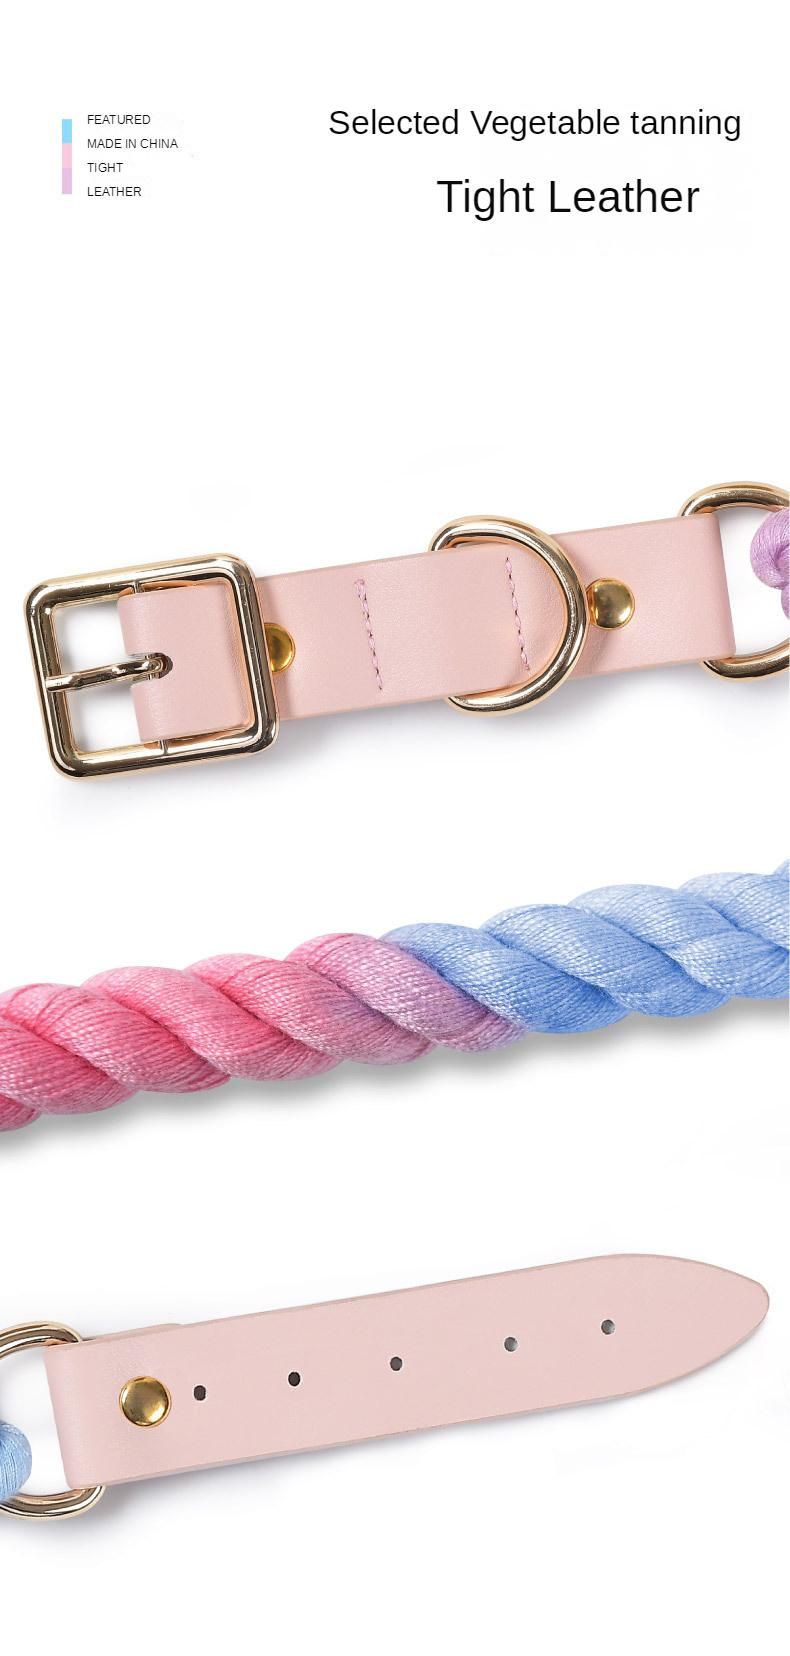 Custom Available Rainbow Colors Cotton Rope Leash with Matching Color Neutral Dog Leash